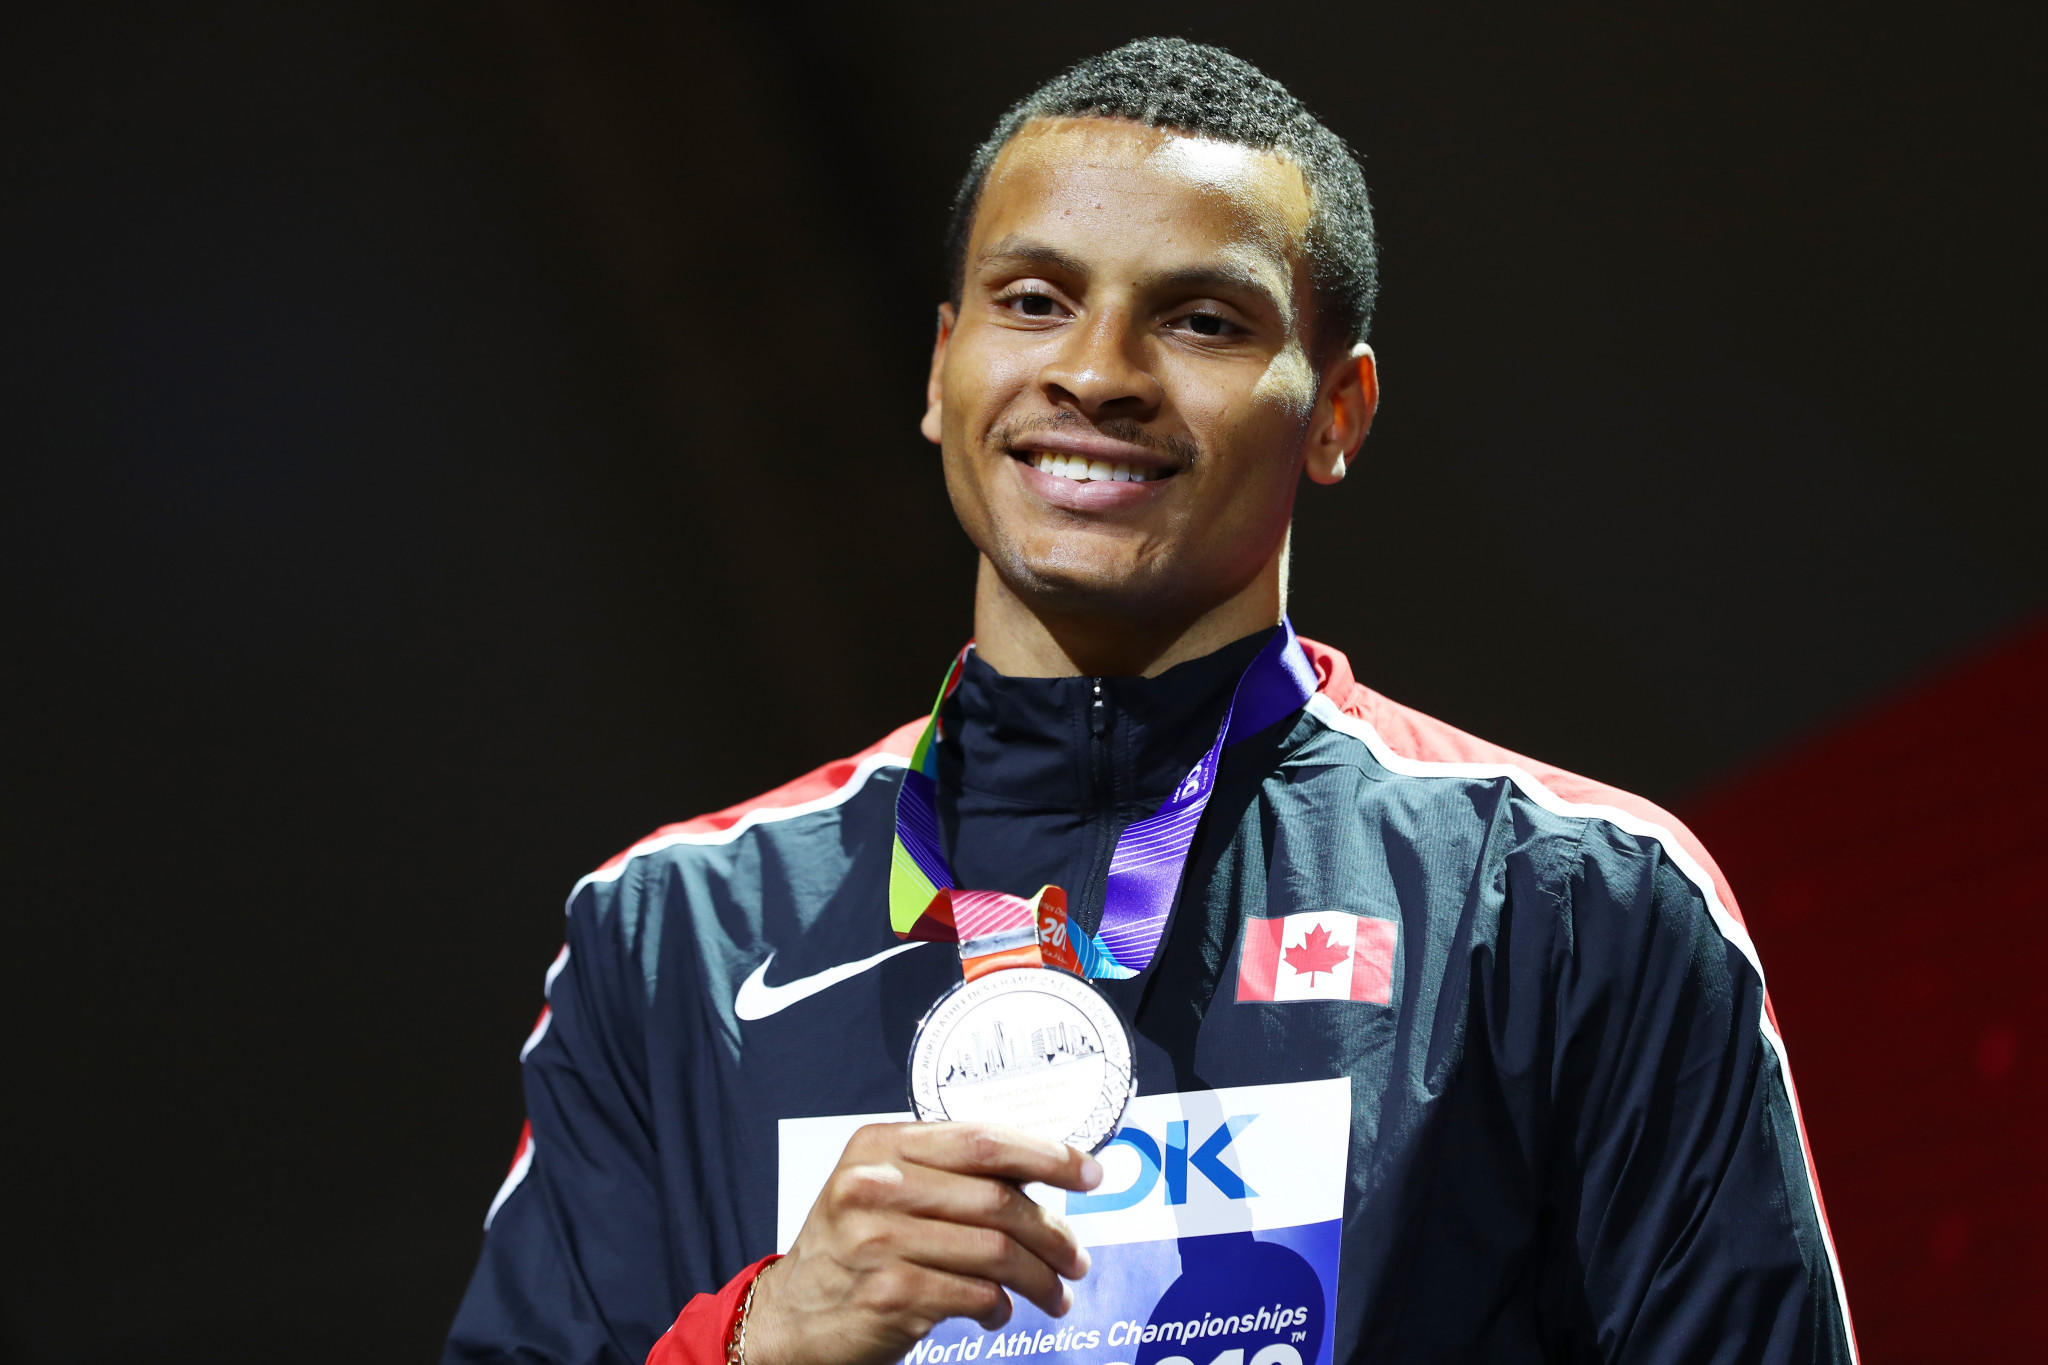 Andre De Grasse won silver and bronze medals at last year's World Championships ©Getty Images